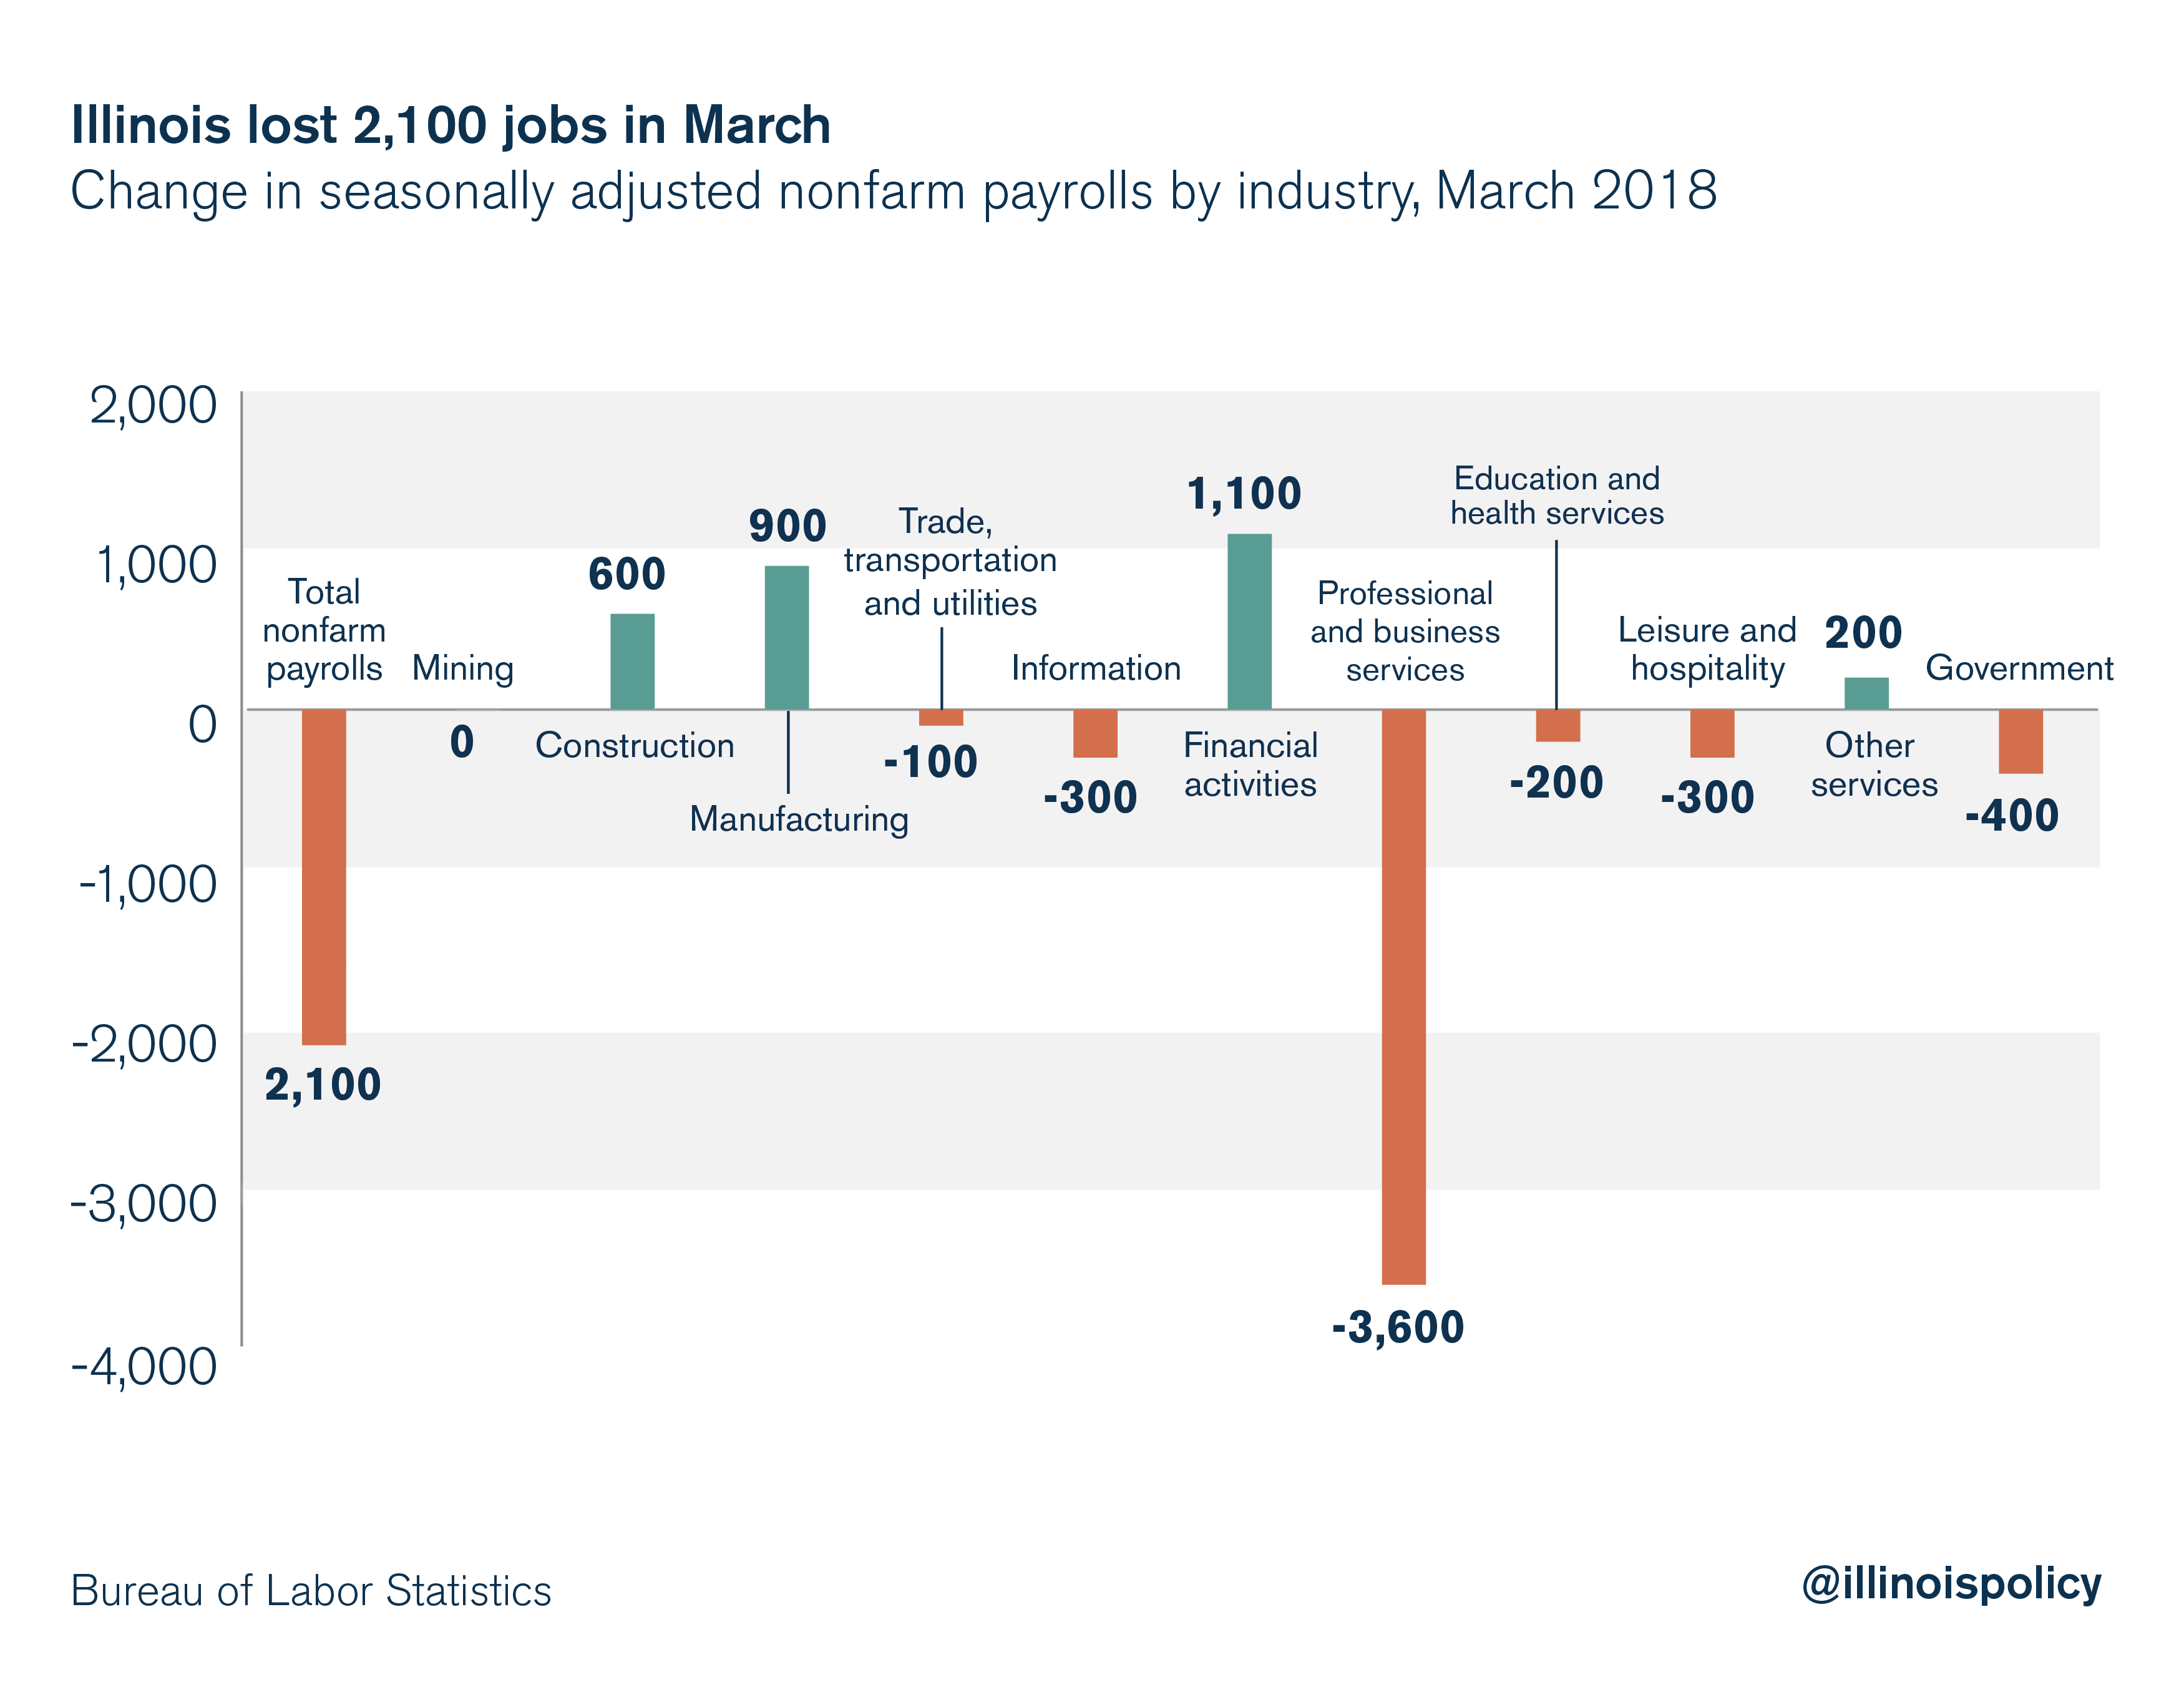 Illinois lost 2,100 jobs in March